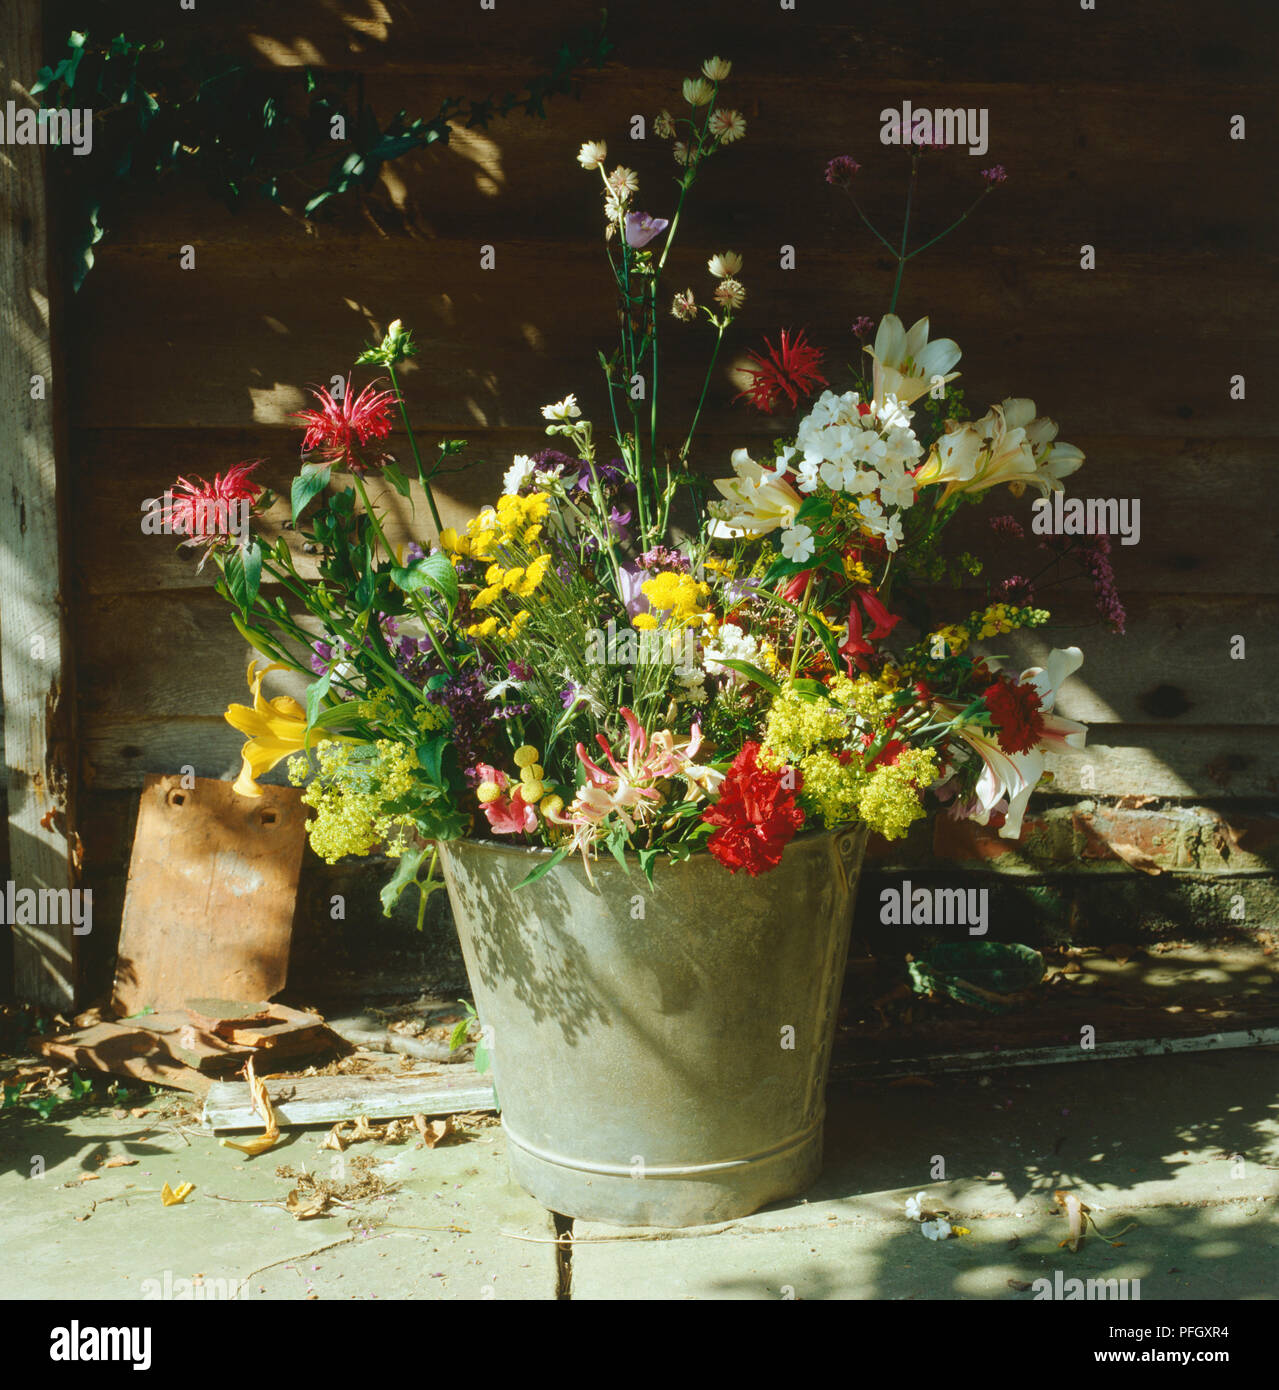 Bright array of cottage-garden flowers arranged in an old metal bucket, bucket standing on paving stones half in shade, wooden fence in background. Stock Photo